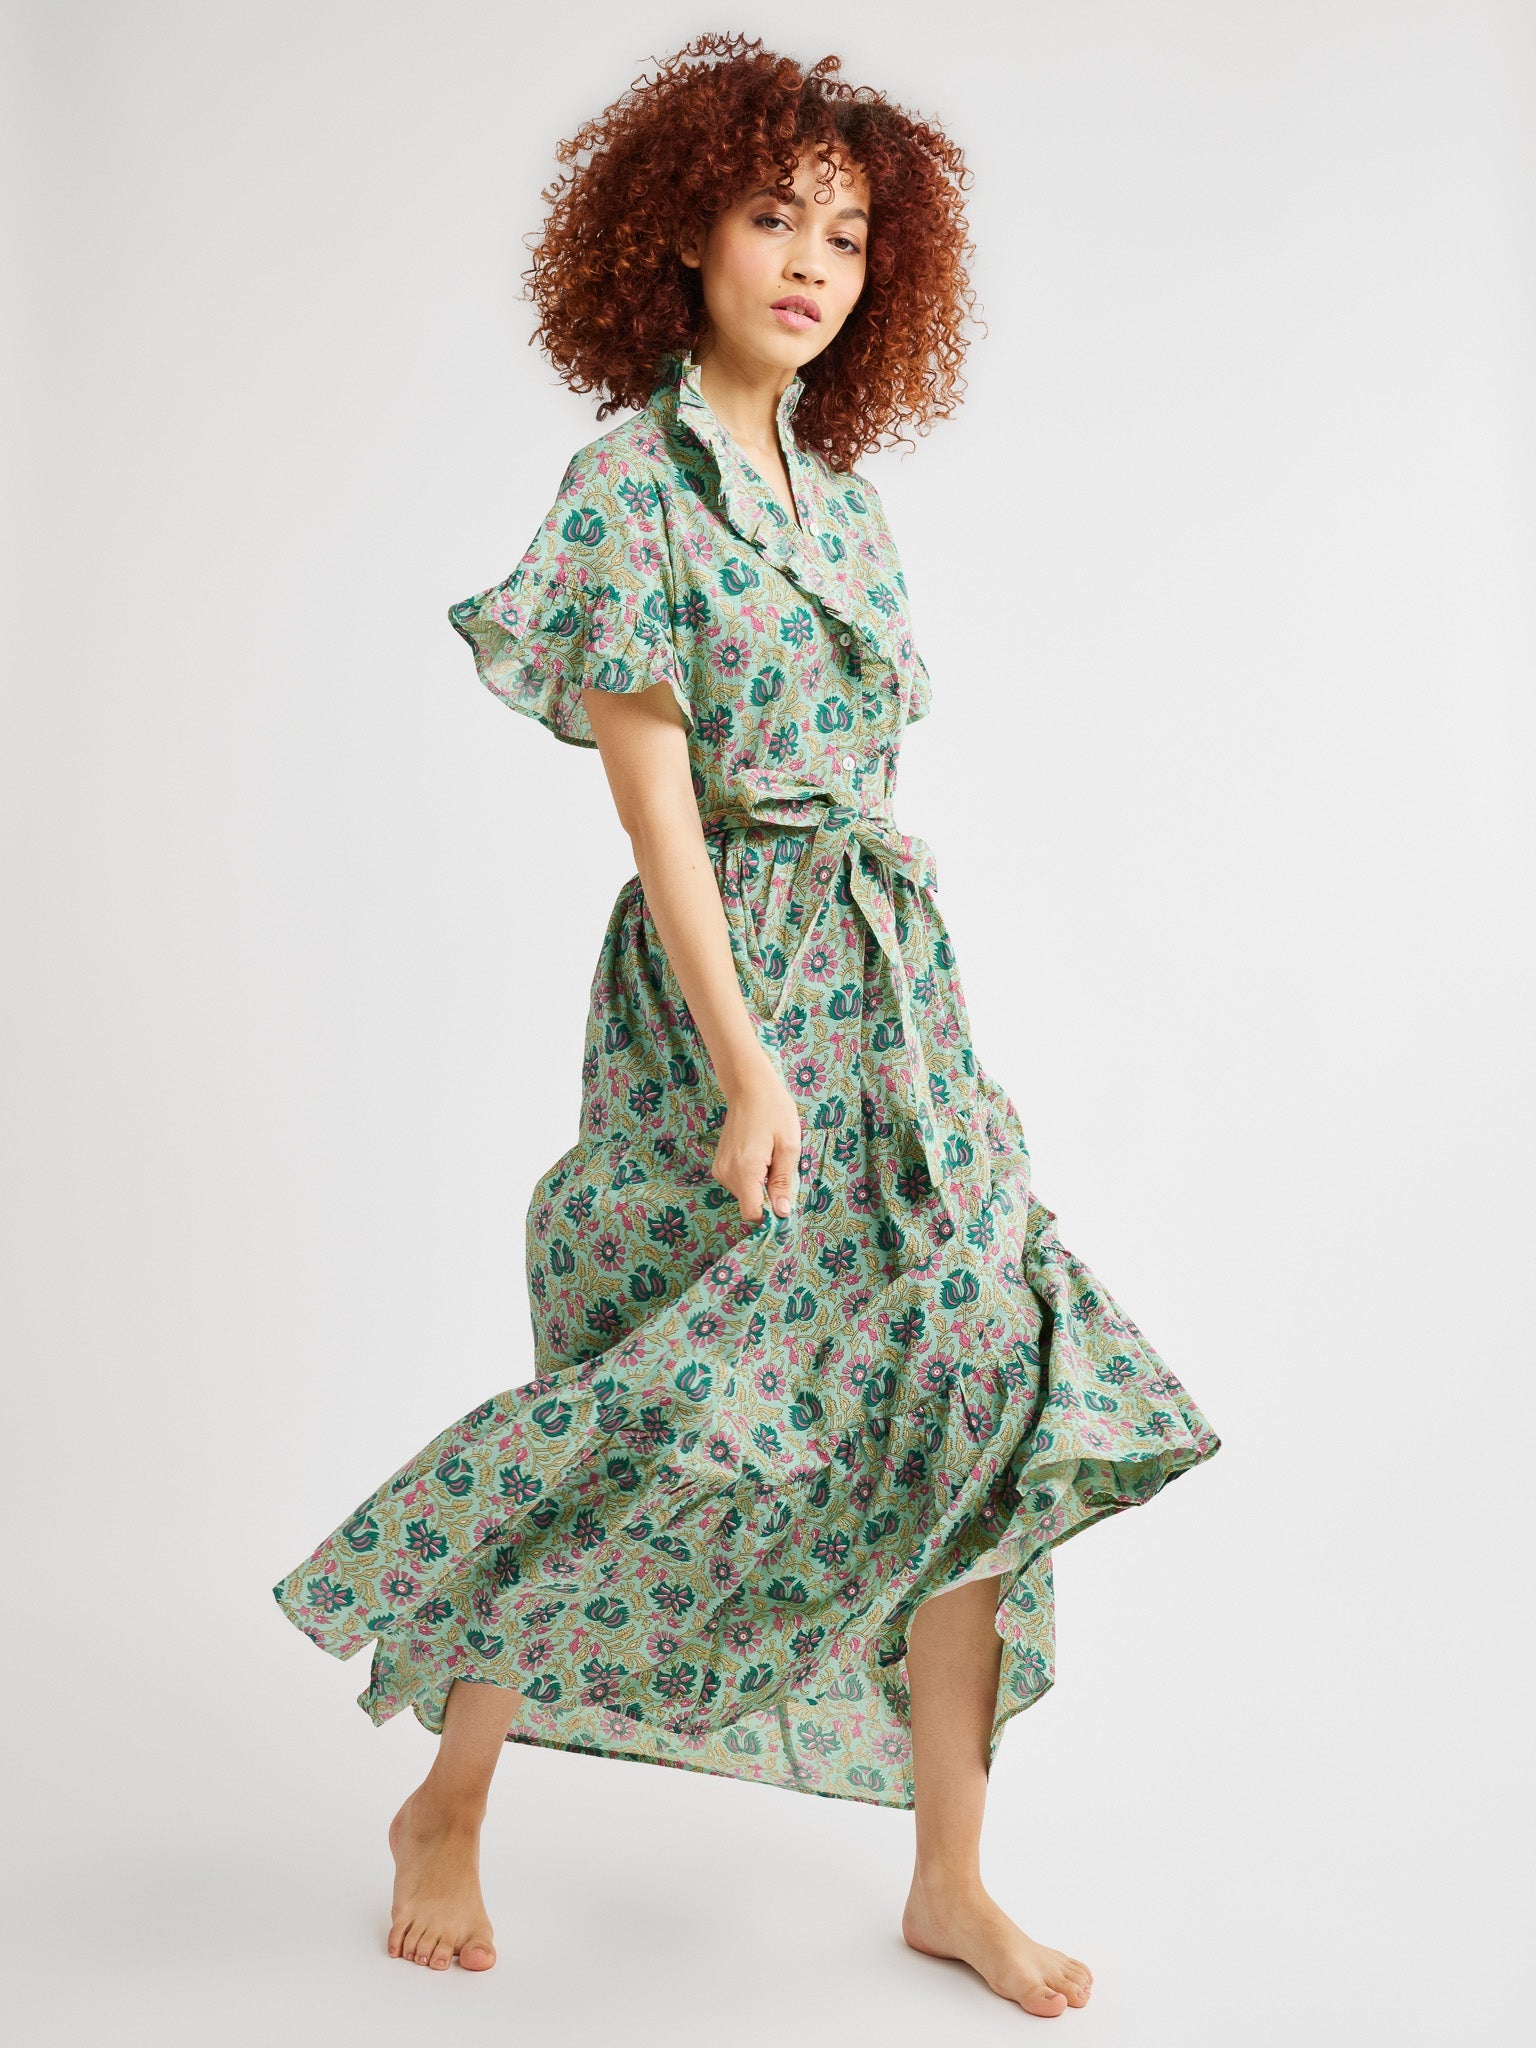 MILLE Clothing Victoria Dress in Caribbean Floral